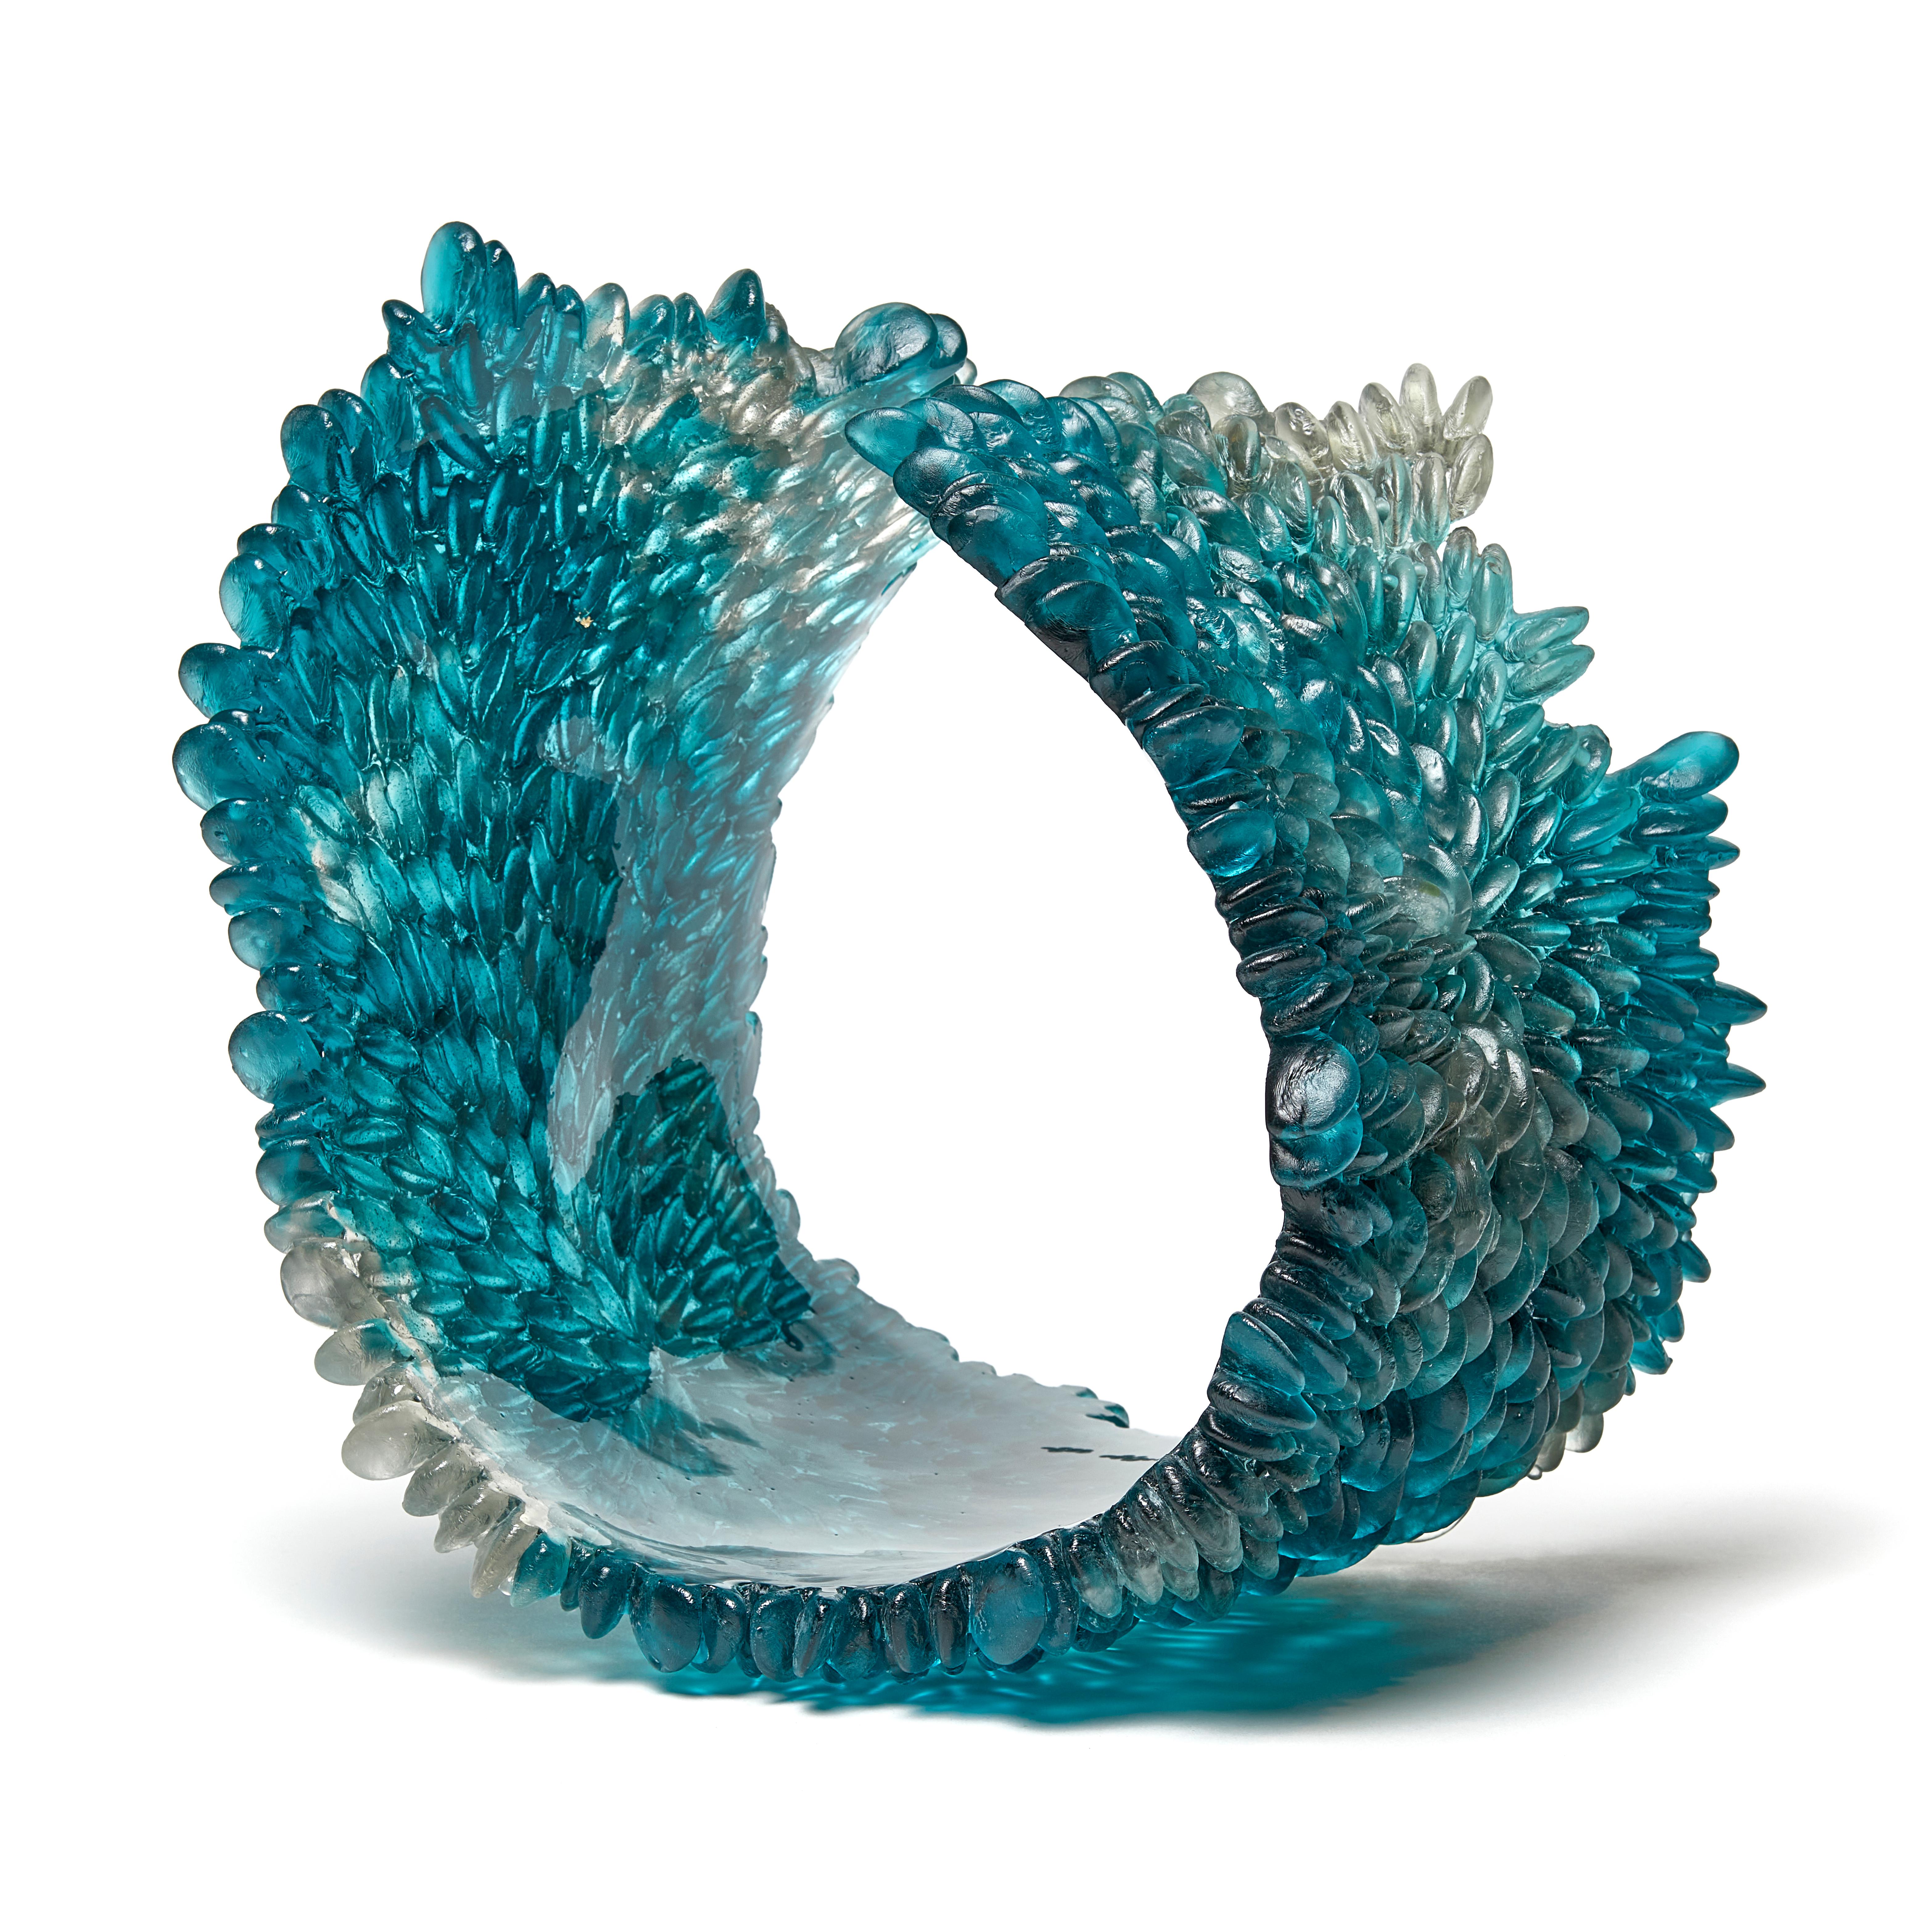 Organic Modern Curled Over IV, Unique Glass Sculpture in teal & grey by Nina Casson McGarva